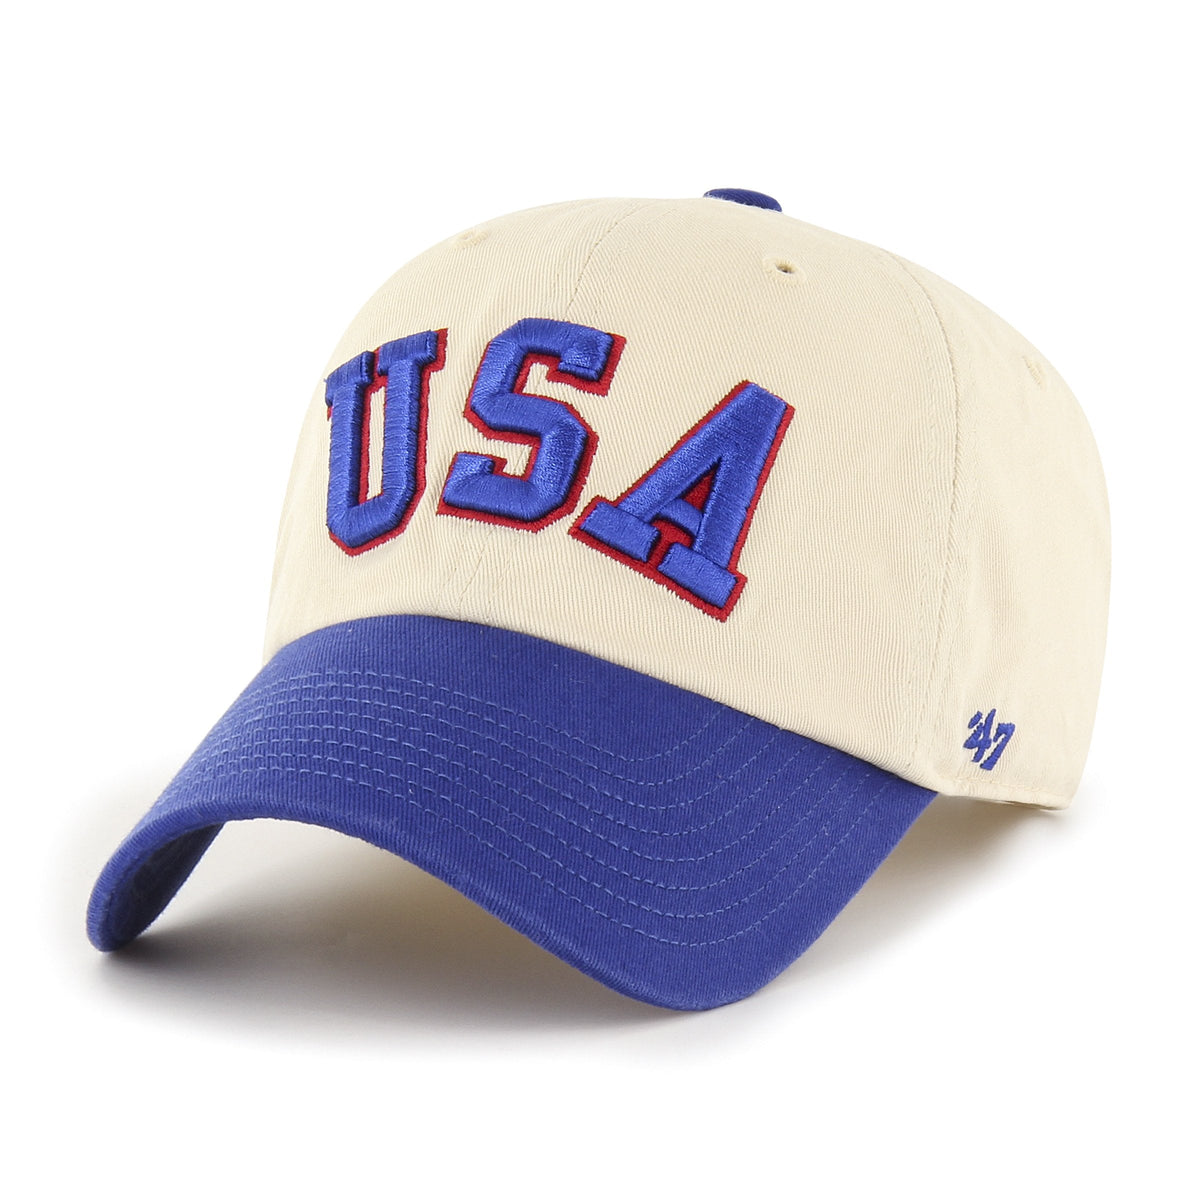 USA HOCKEY MIRACLE ON ICE TWO TONE '47 CLEAN UP